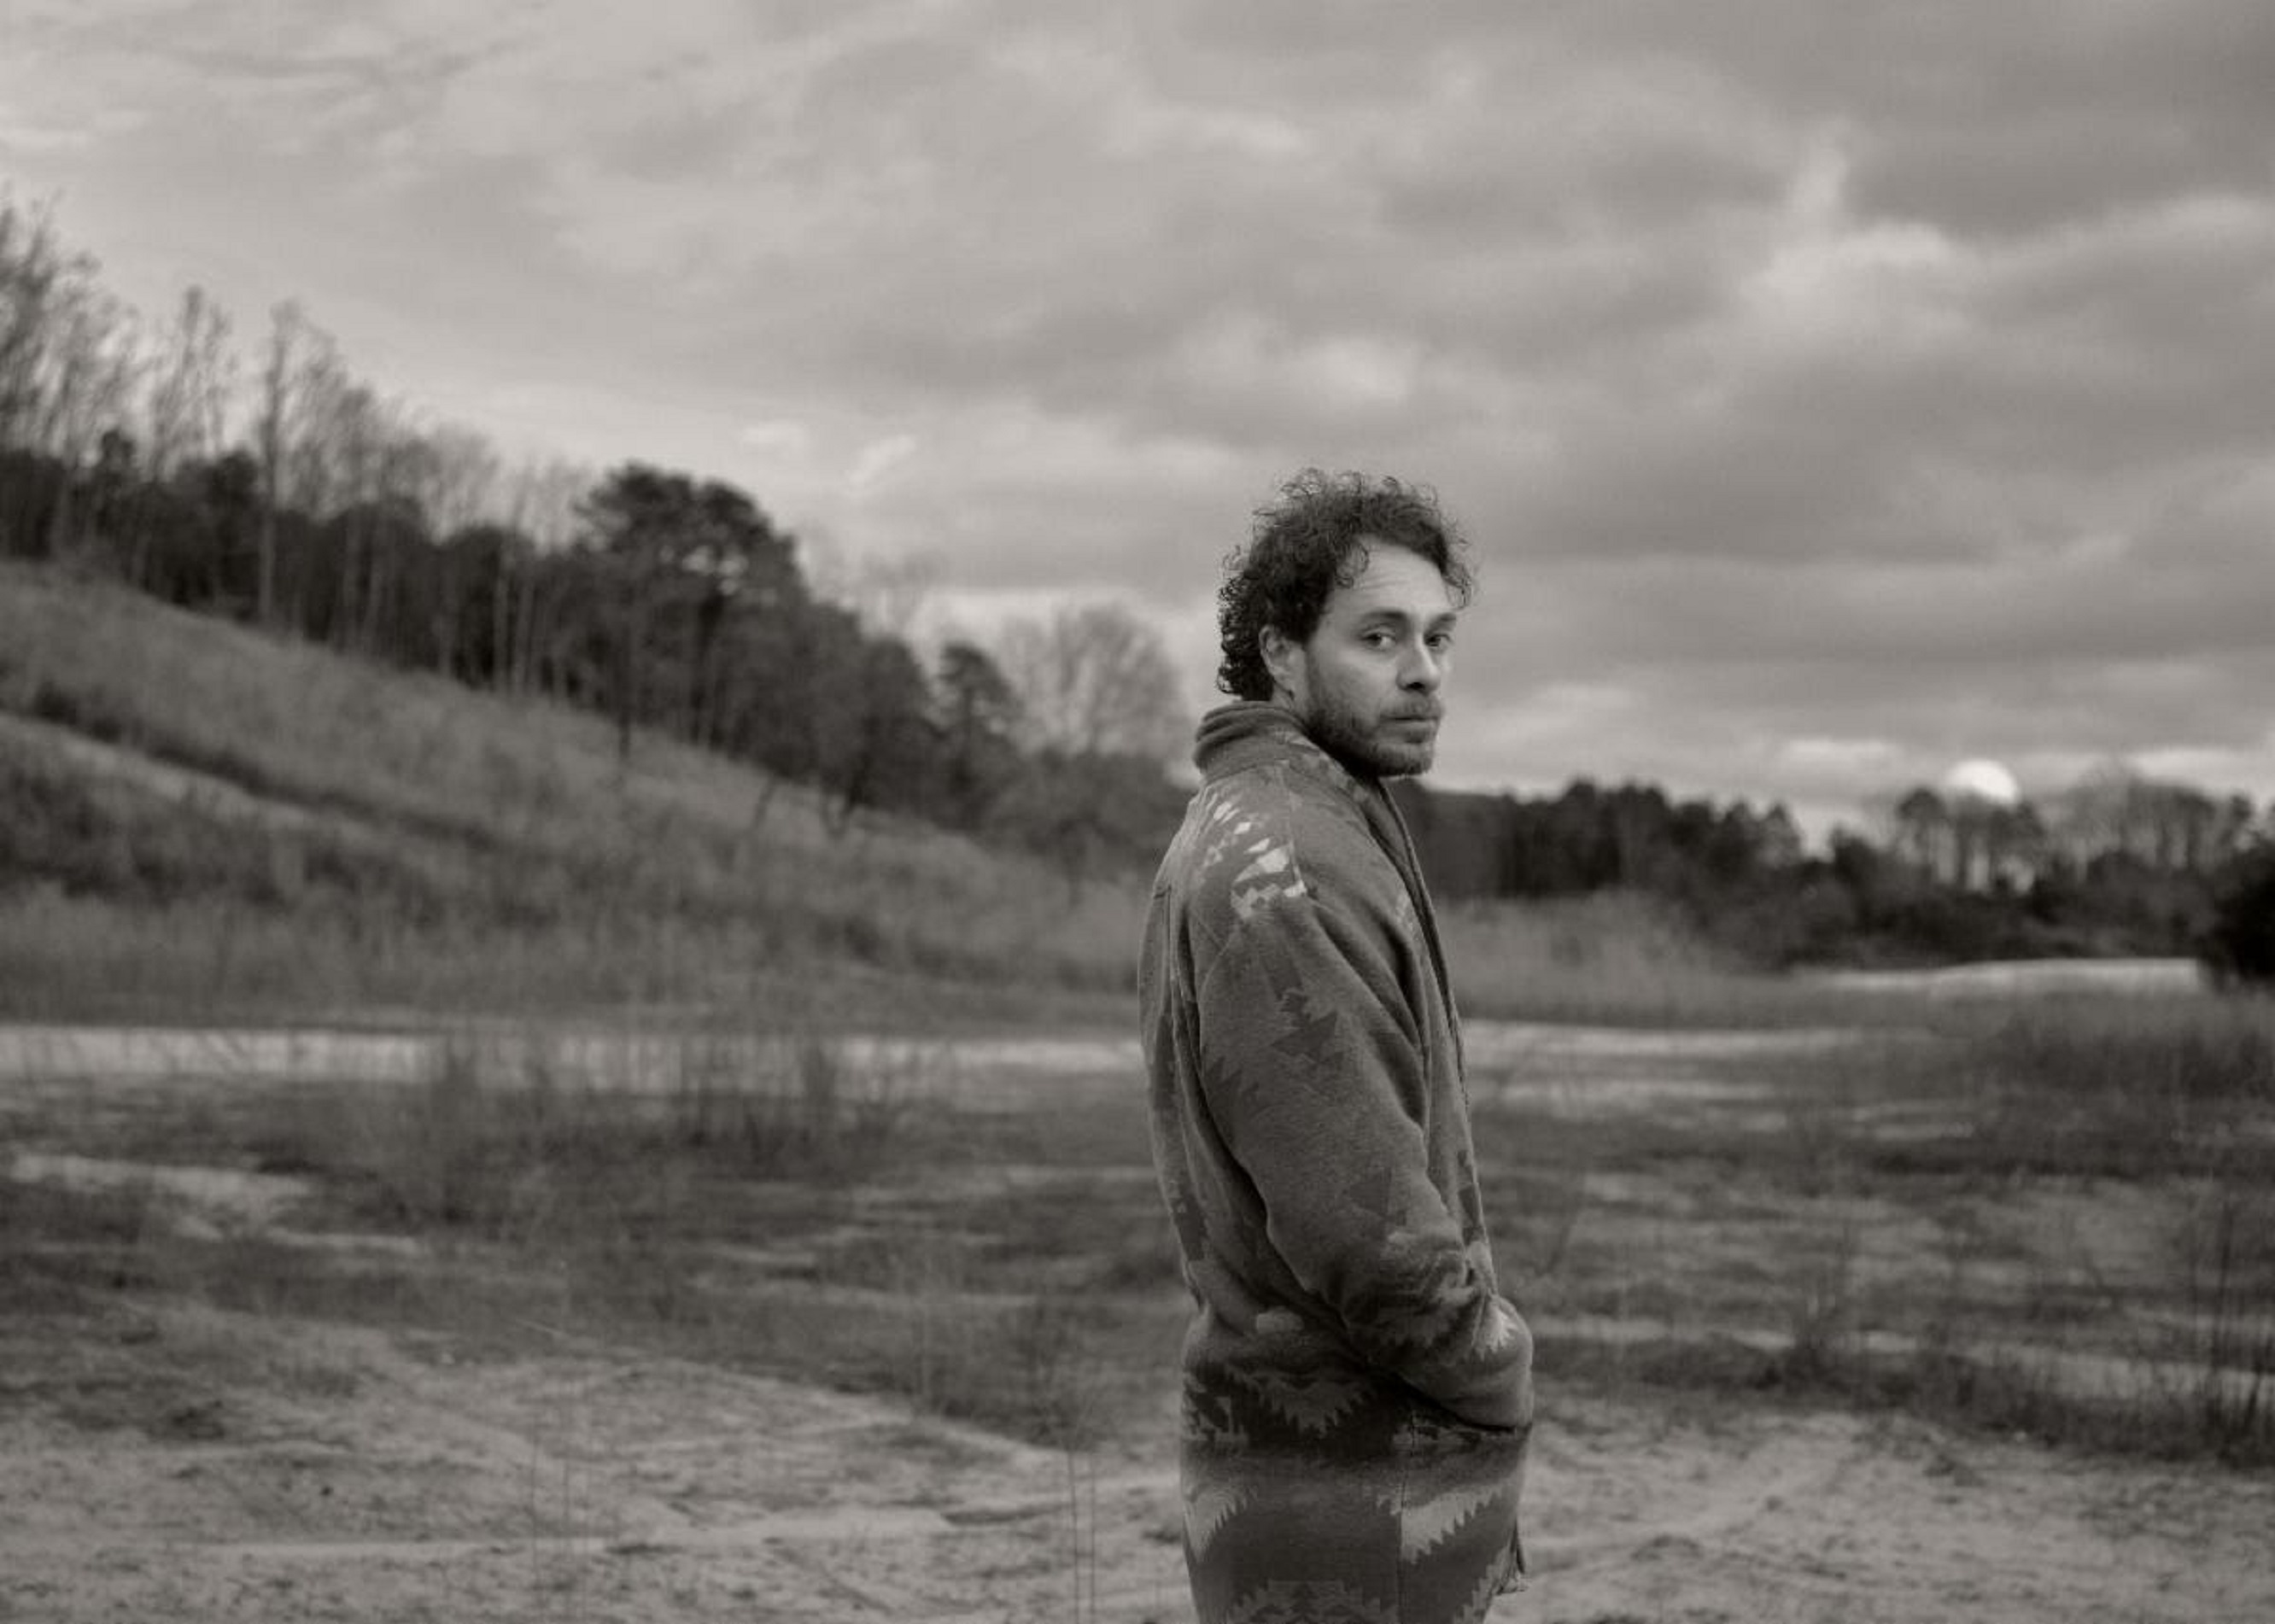 Amos Lee Announces Additional Tour Dates; New Record To Be Announced Soon